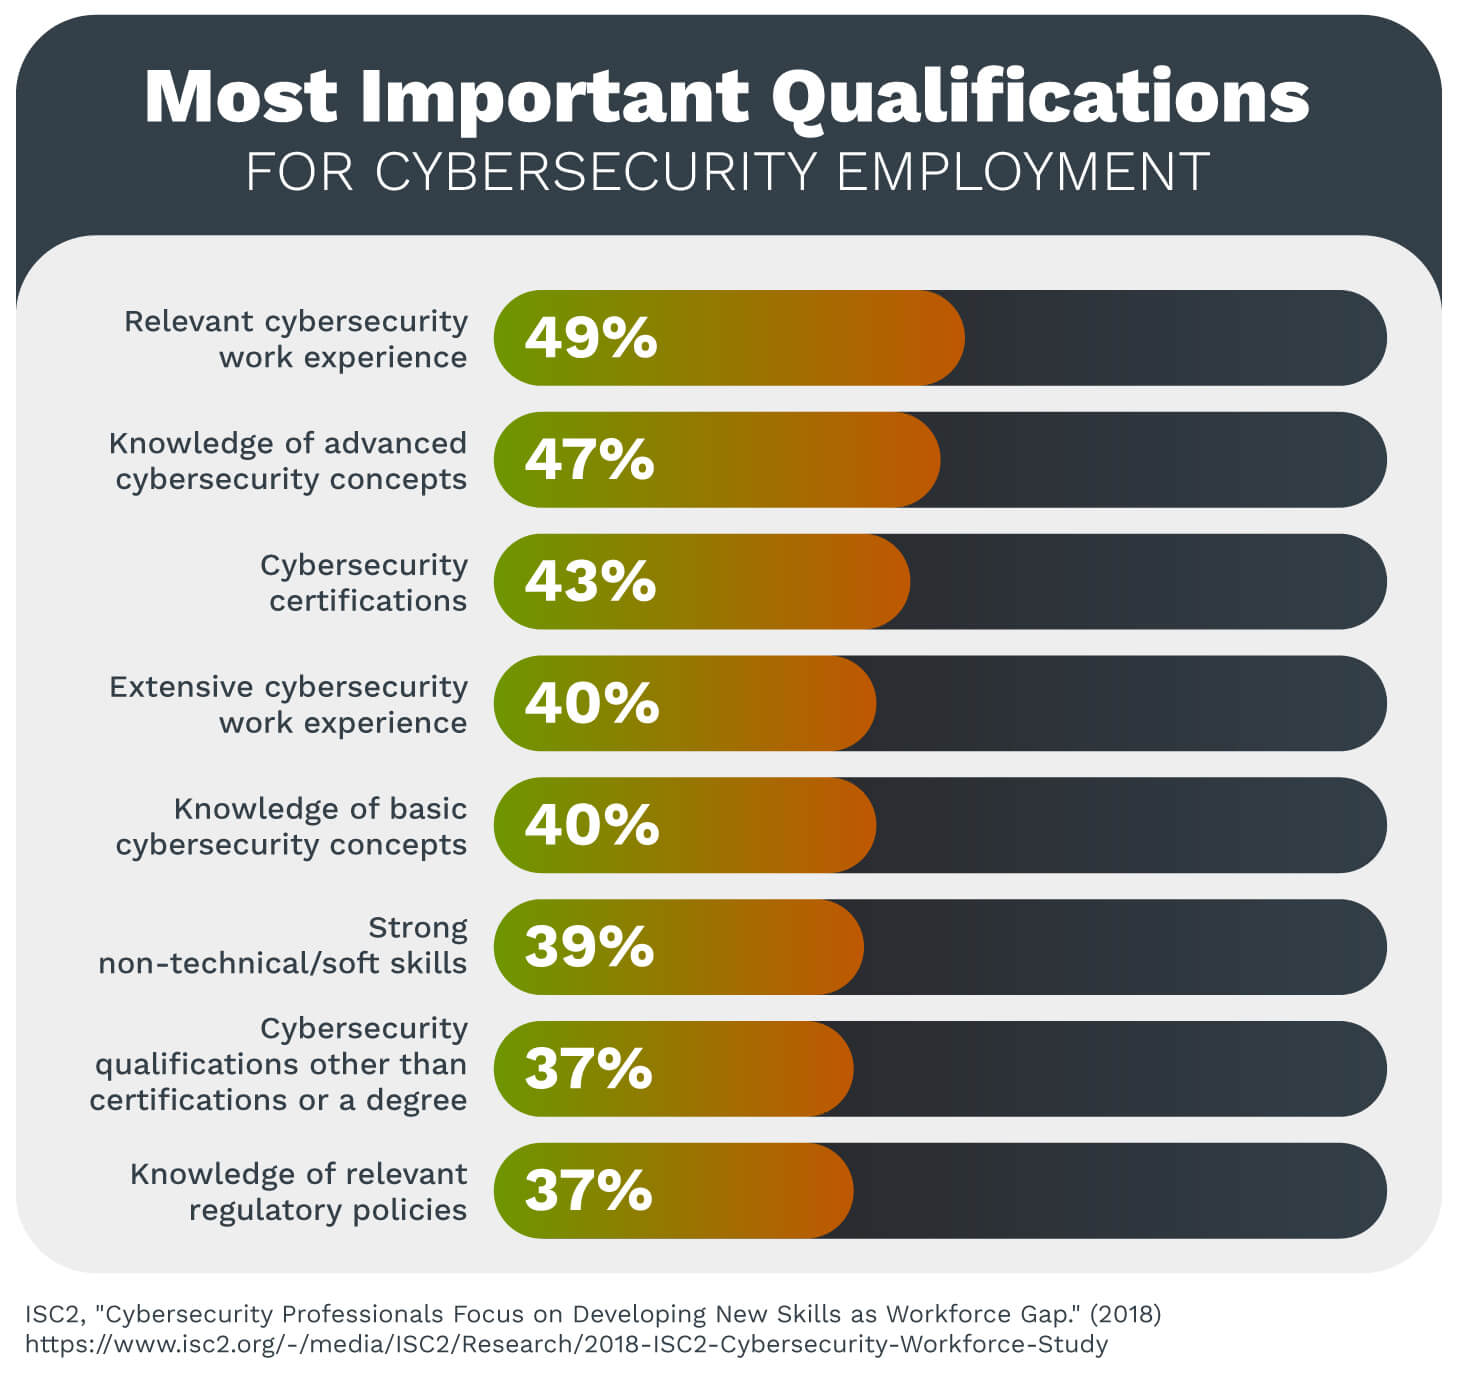 The most important qualifications for cybersecurity employment